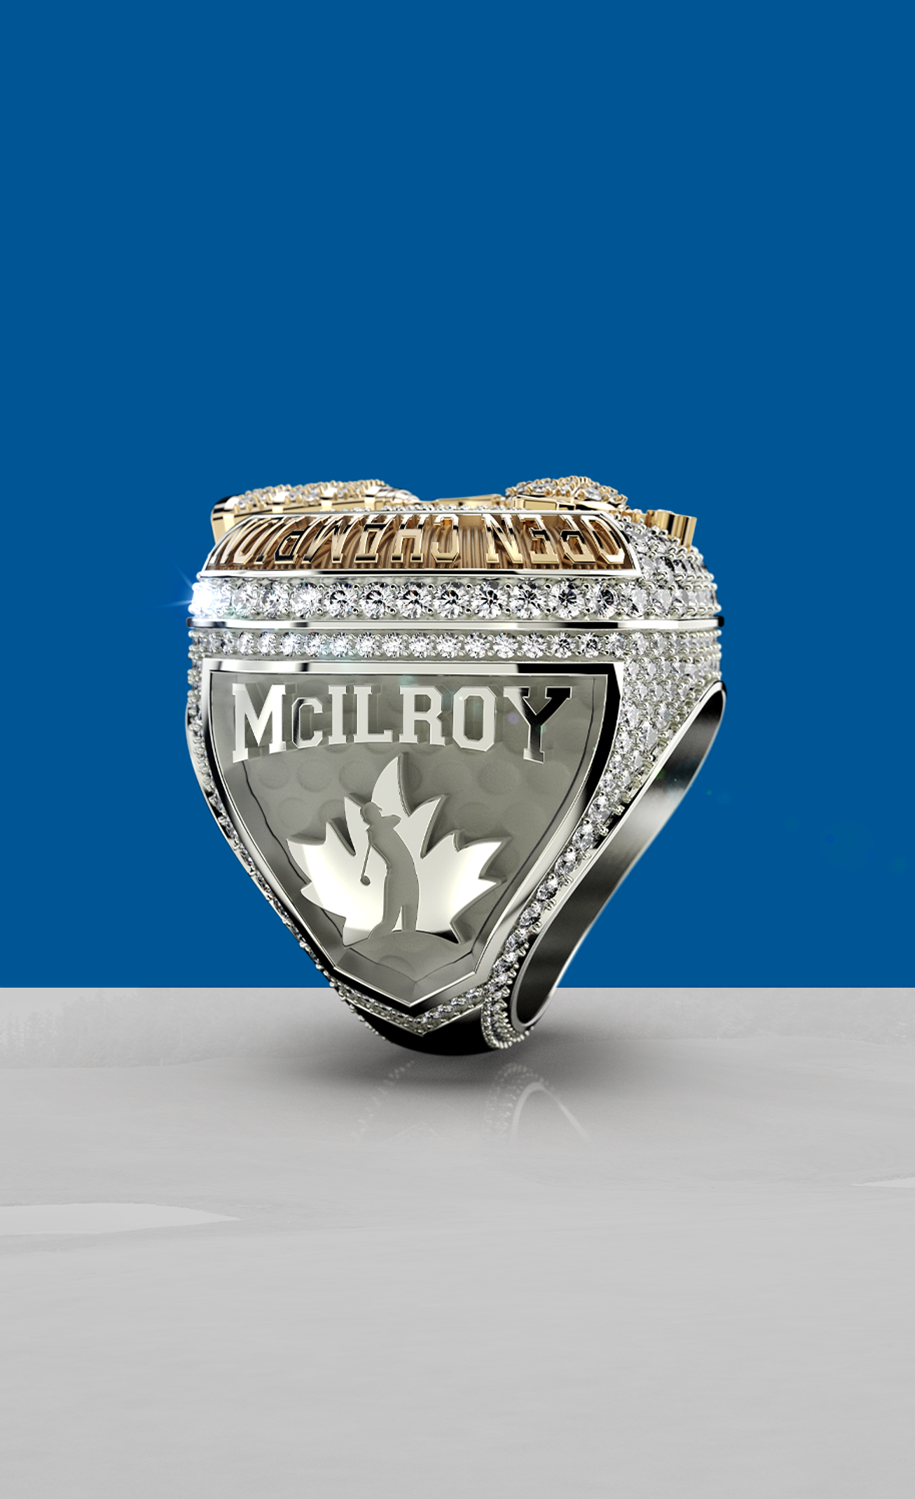 Sports Promotions, Custom Replica Rings, Championship Ring Promotions